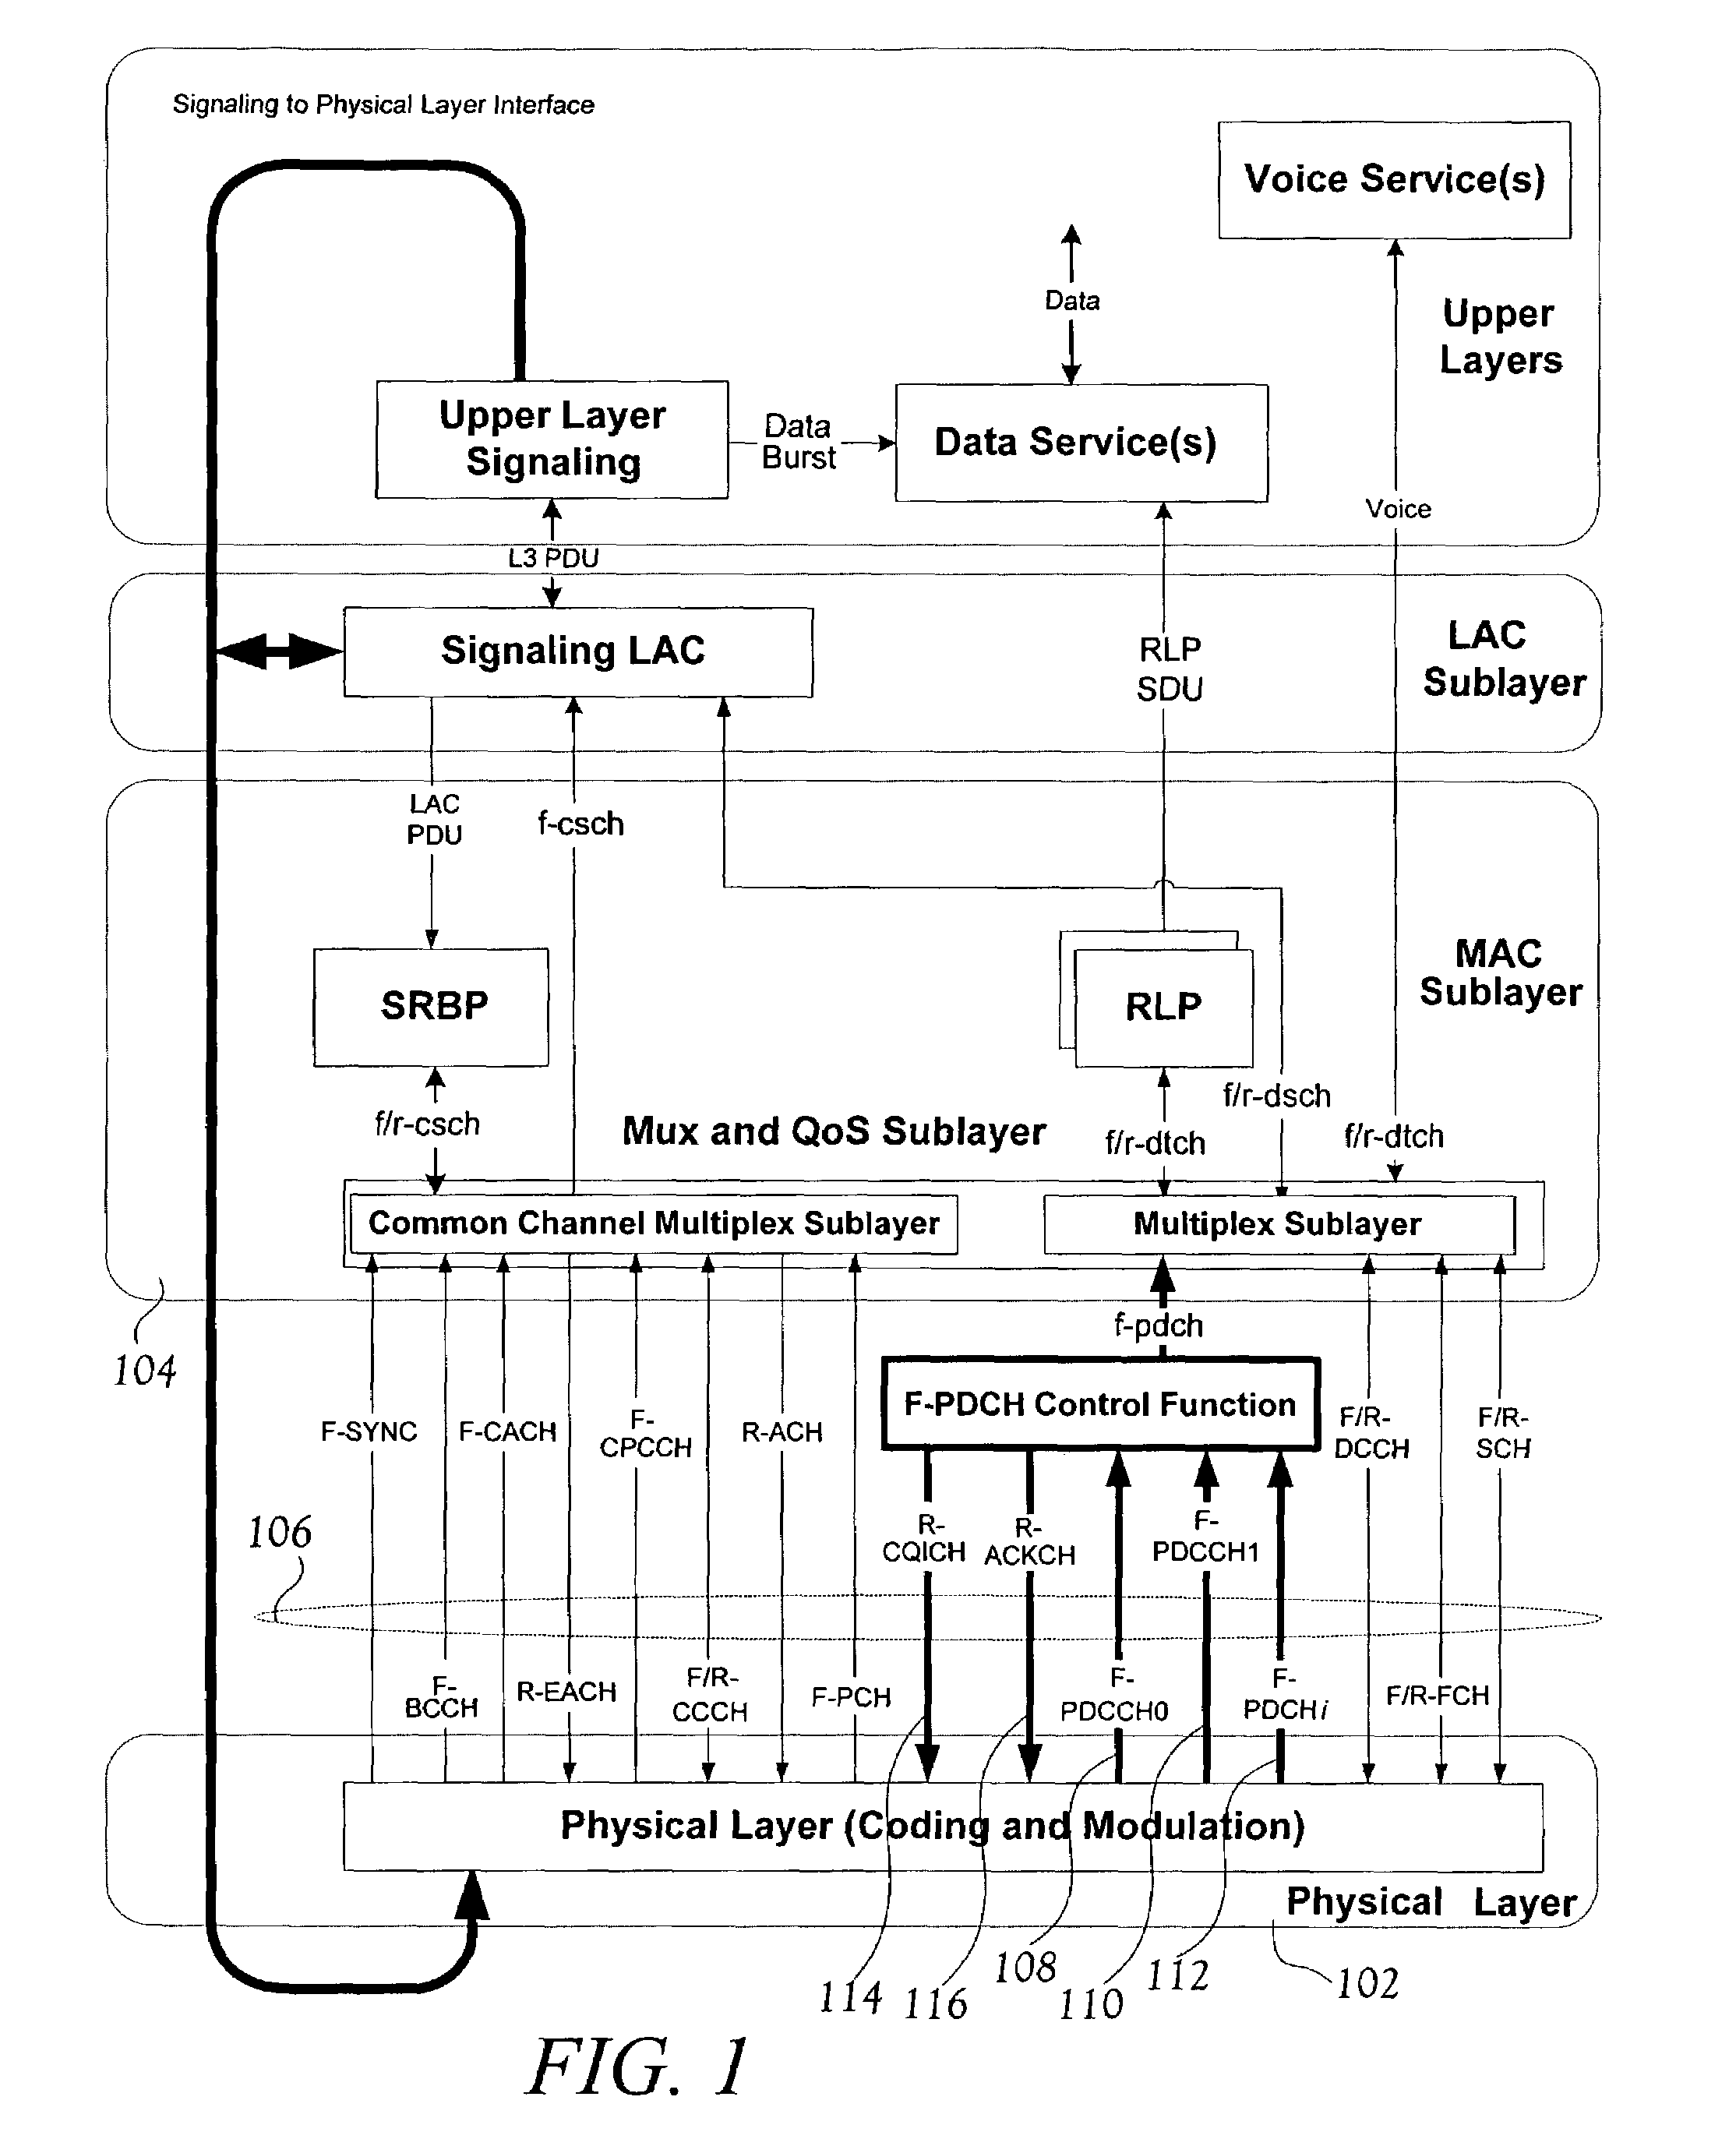 Power control of plural packet data control channels